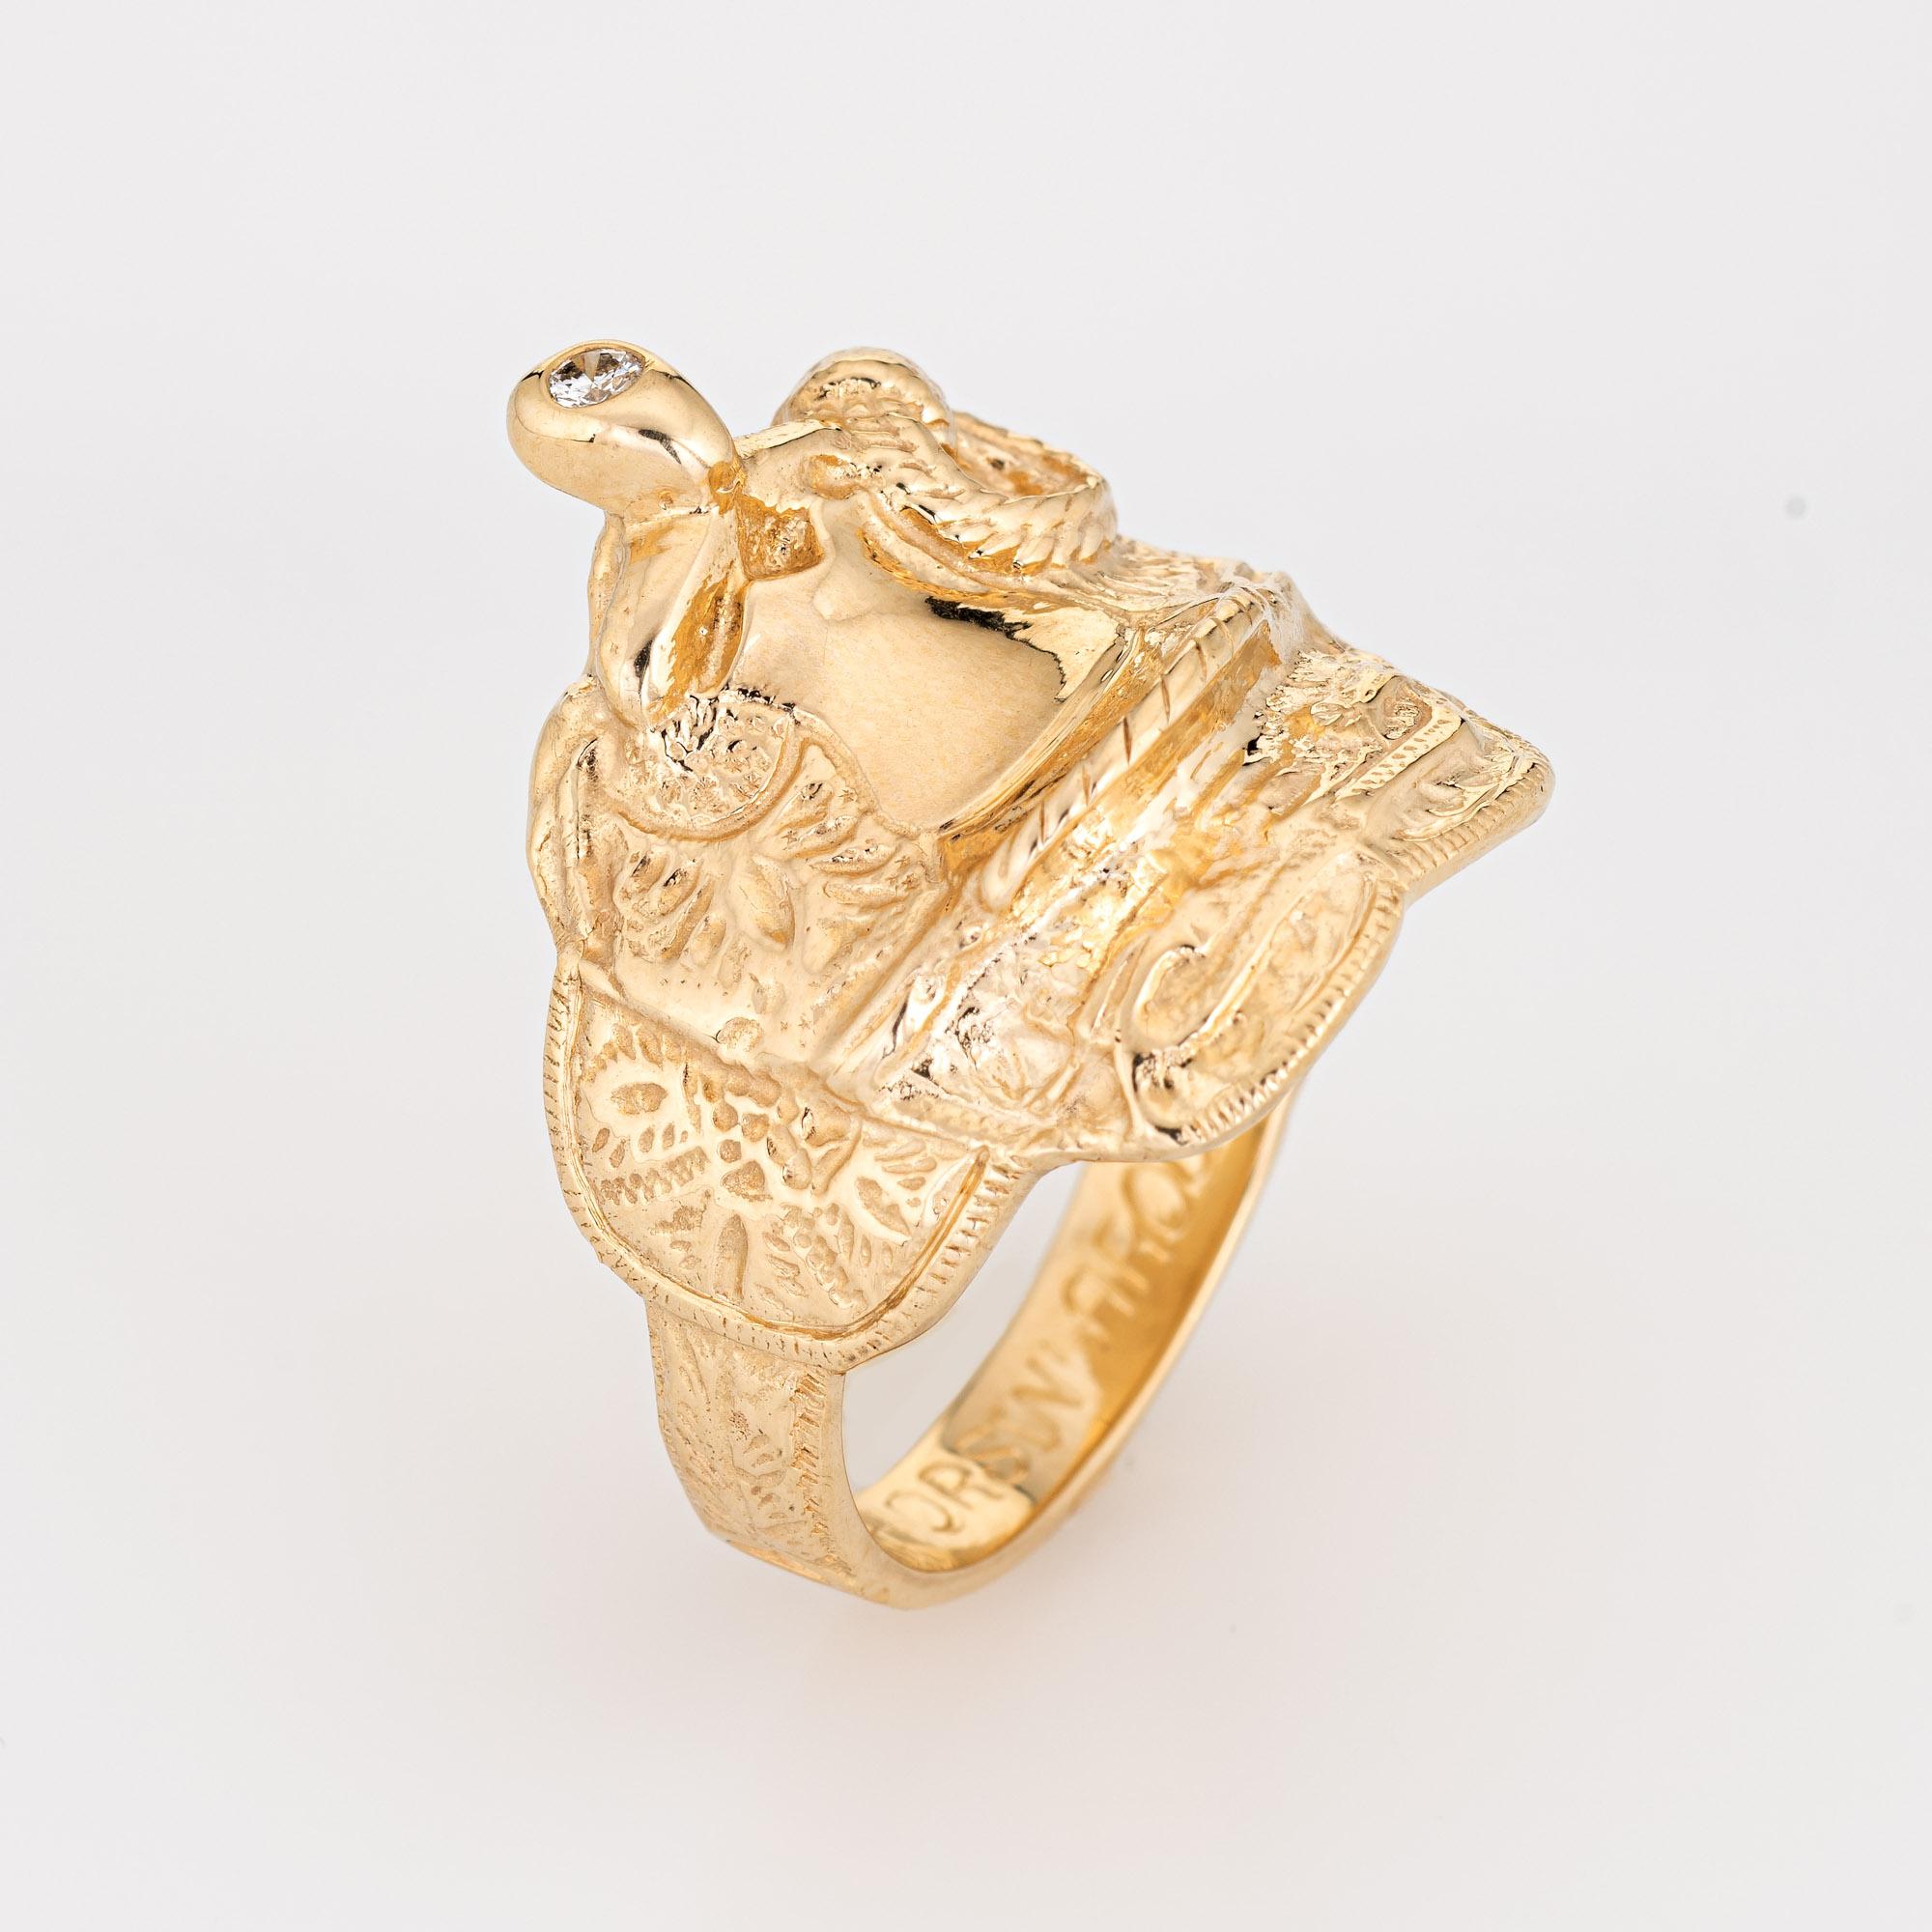 Stylish vintage saddle ring (circa 1970s) crafted in 14 karat yellow gold. 

One round brilliant cut diamond is estimated at 0.05 carats (estimated at H-I color and SI1-2 clarity). 

The beautifully detailed saddle features etched foliate detail